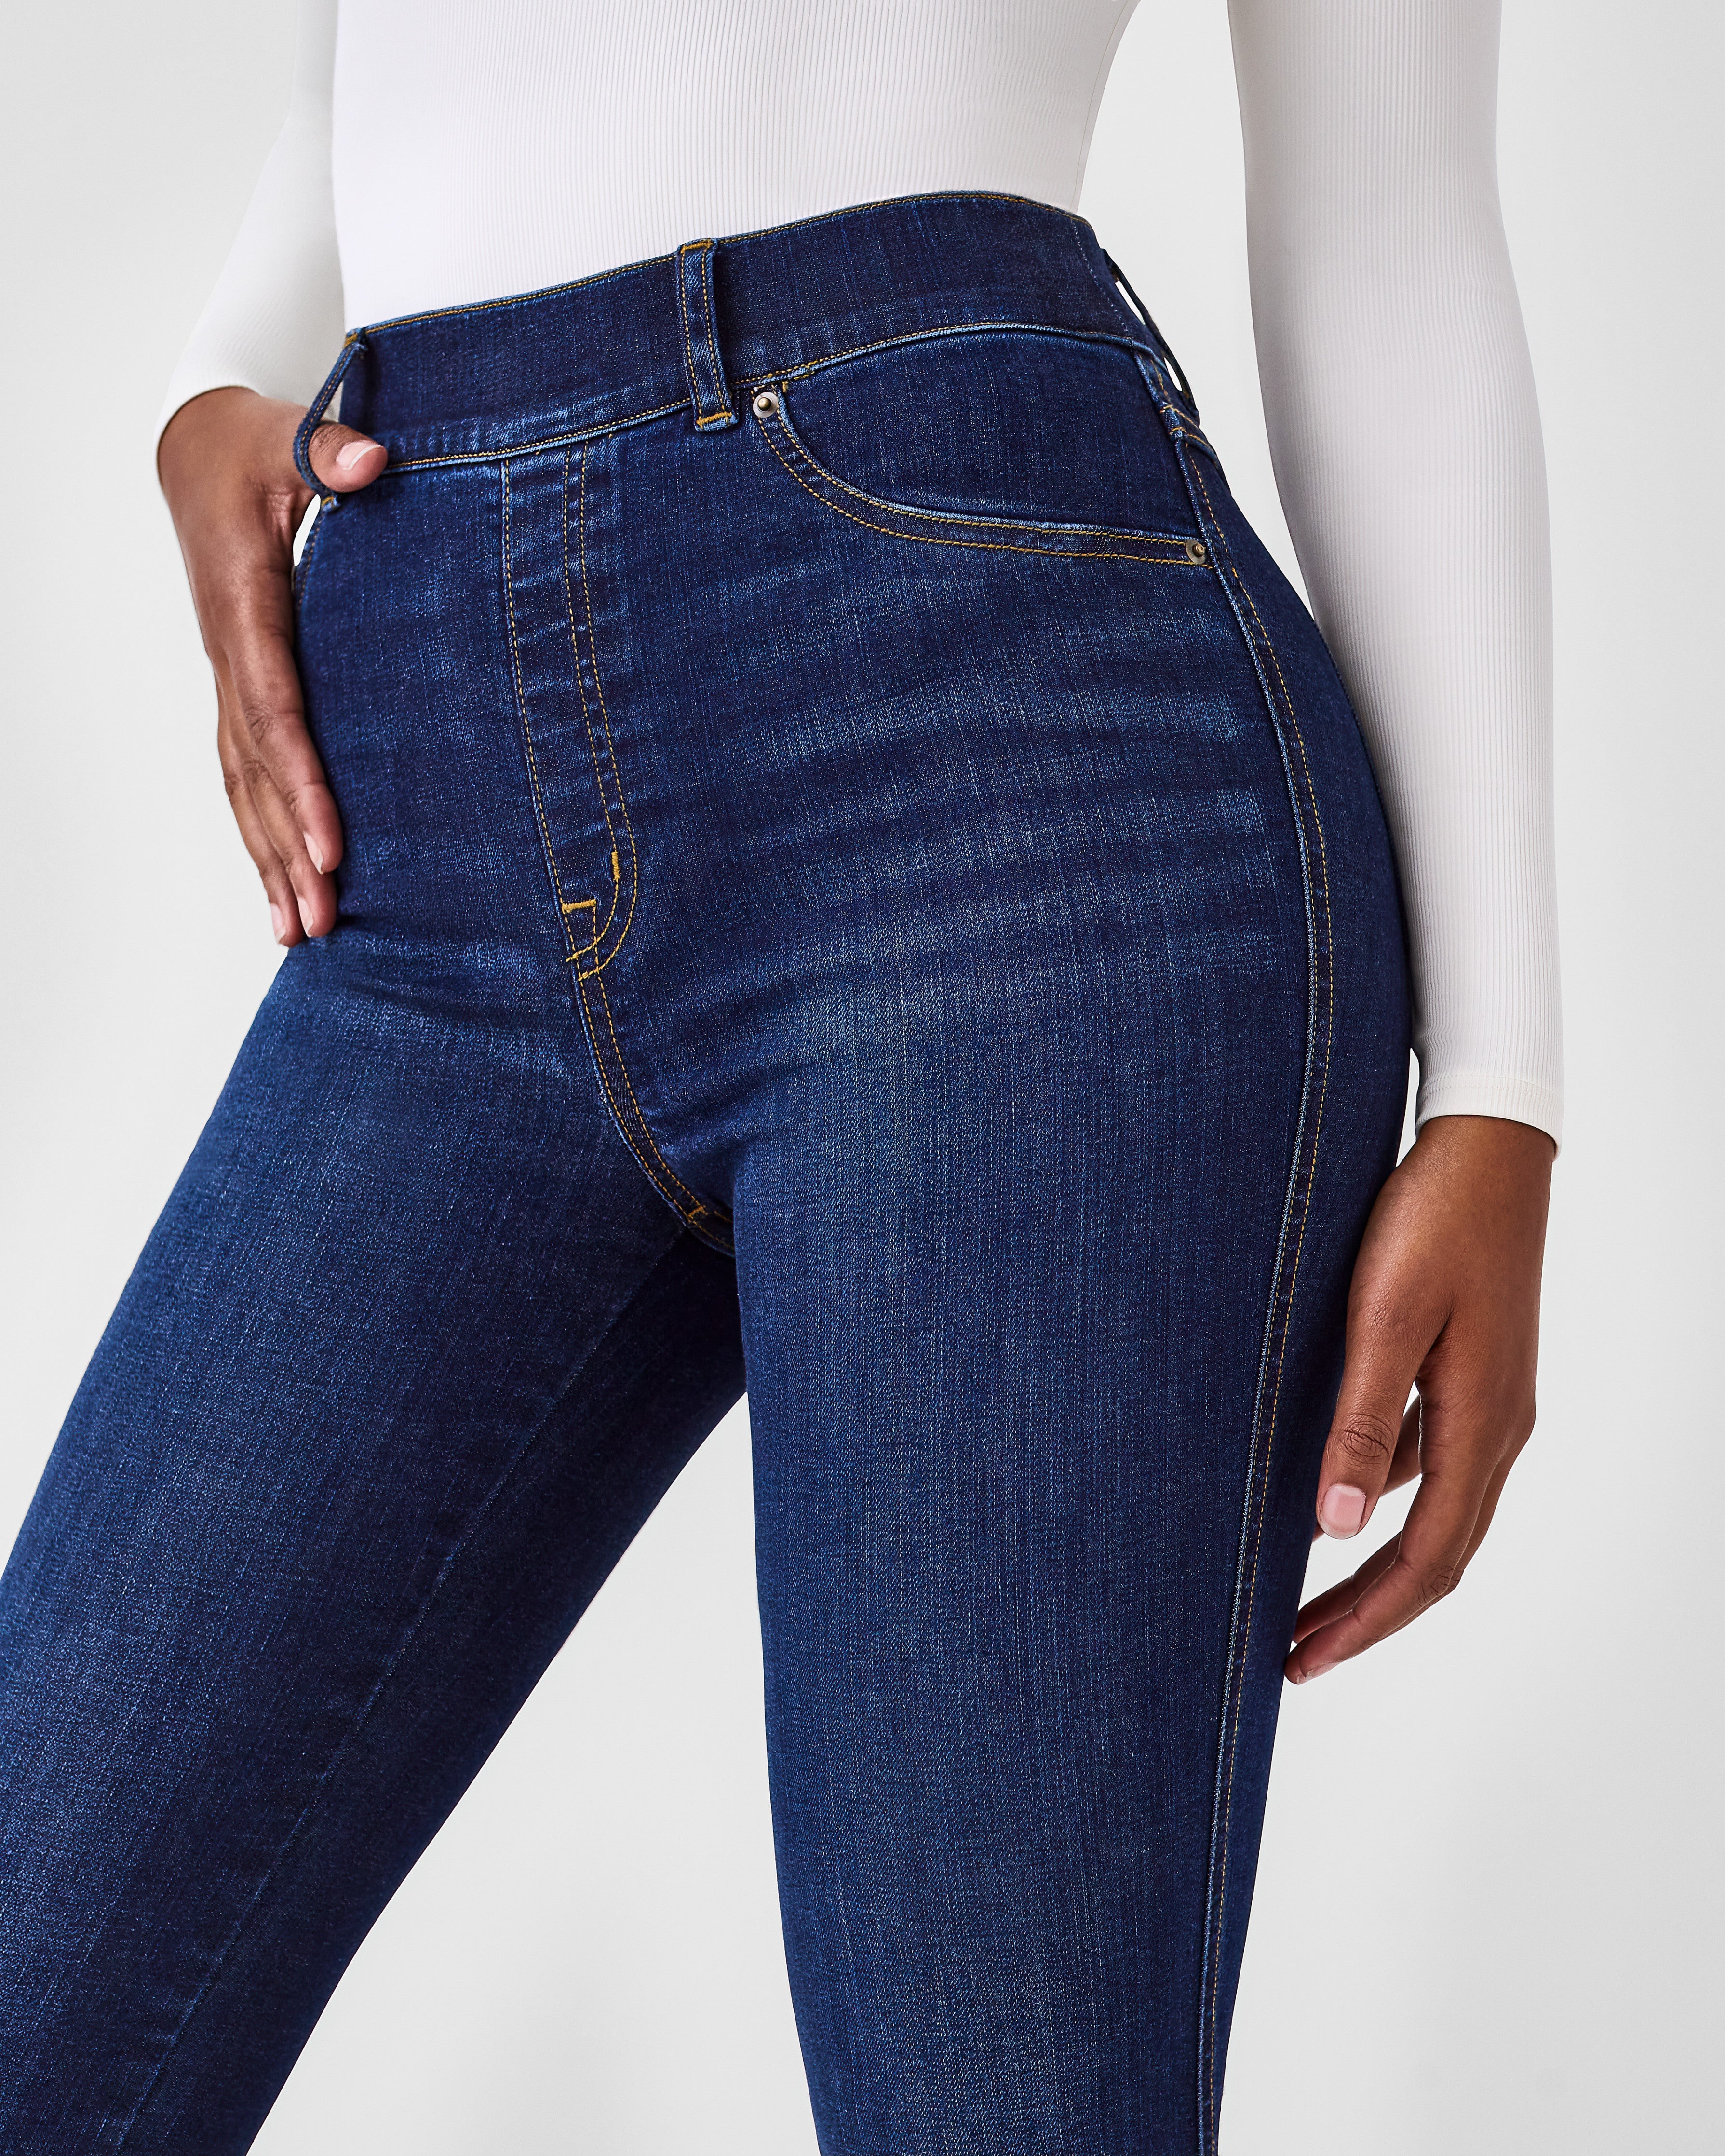 Spanx high rise flare jeans in dark wash